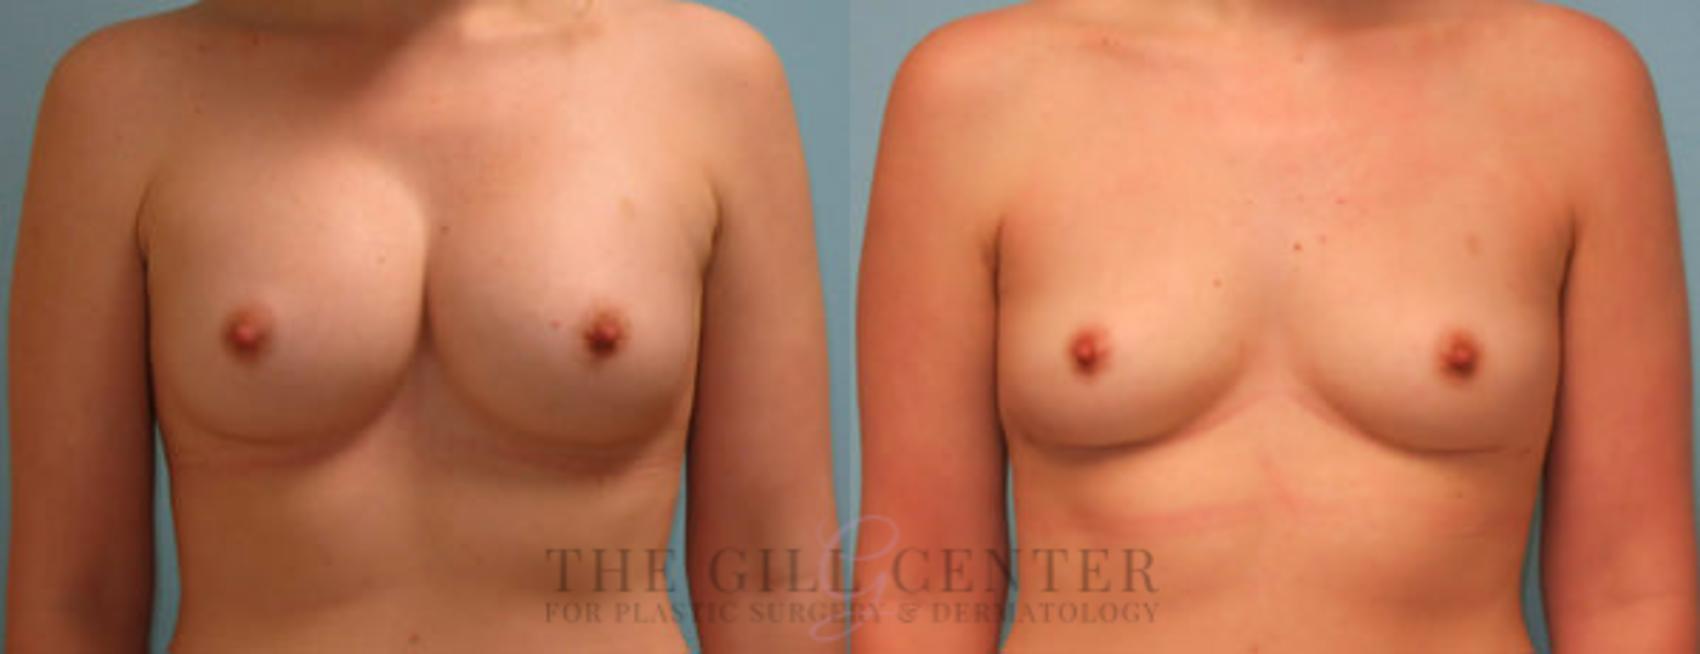 Breast Revisions Case 388 Before & After Front | The Woodlands, TX | The Gill Center for Plastic Surgery and Dermatology